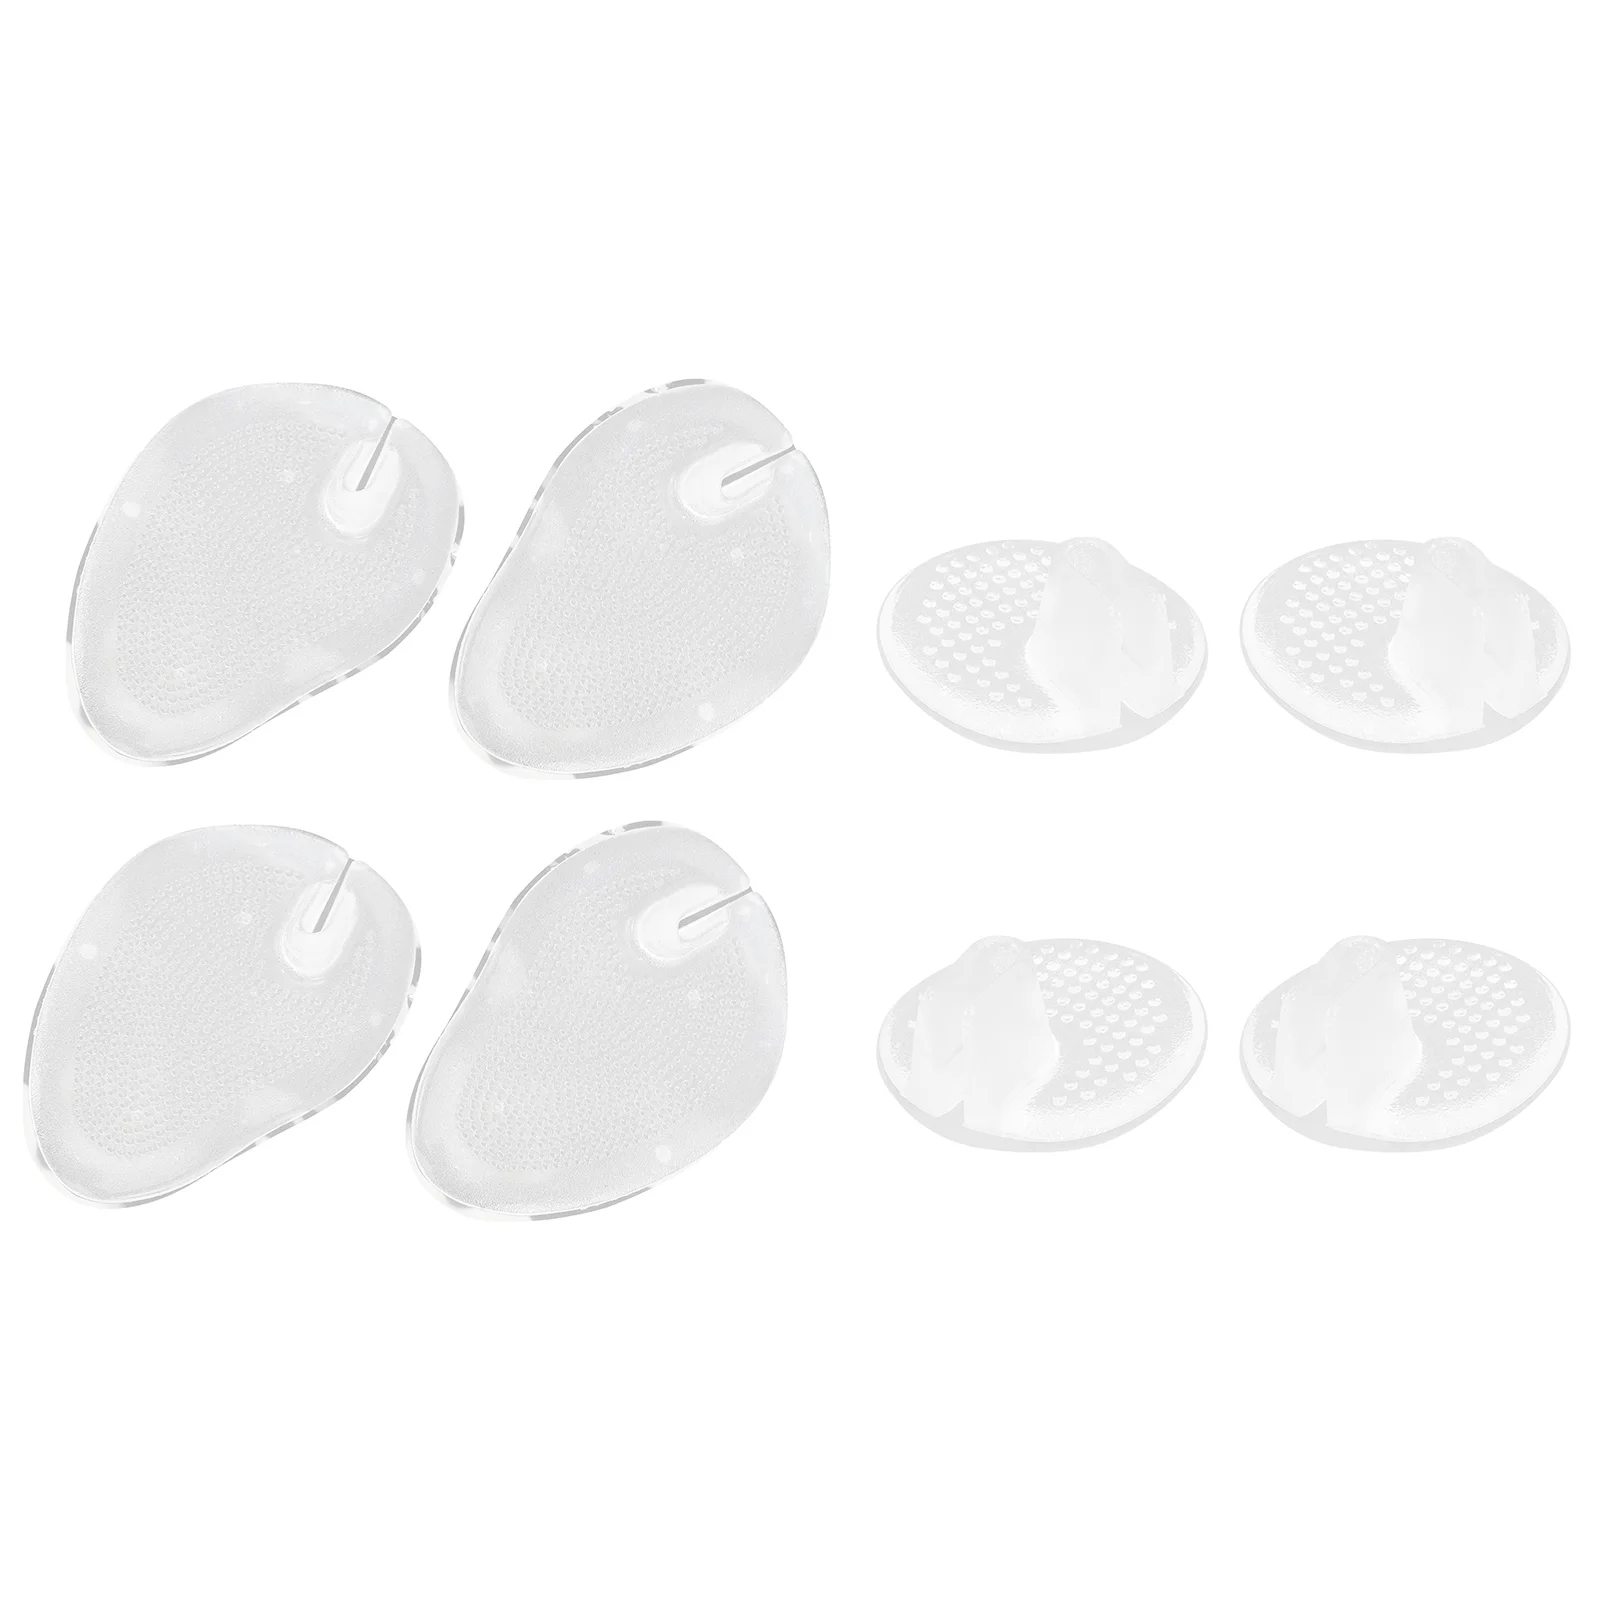 4 Pairs Thong Sandal Clear Thong Sandal Thong Sandal Toe Pads Silicone Forefoot Cushions Clear Toe Grip Pads 100pcs front clear back silver mylar foil zip lock stand up bag zipper grip seal resealable reusable food storage doypack